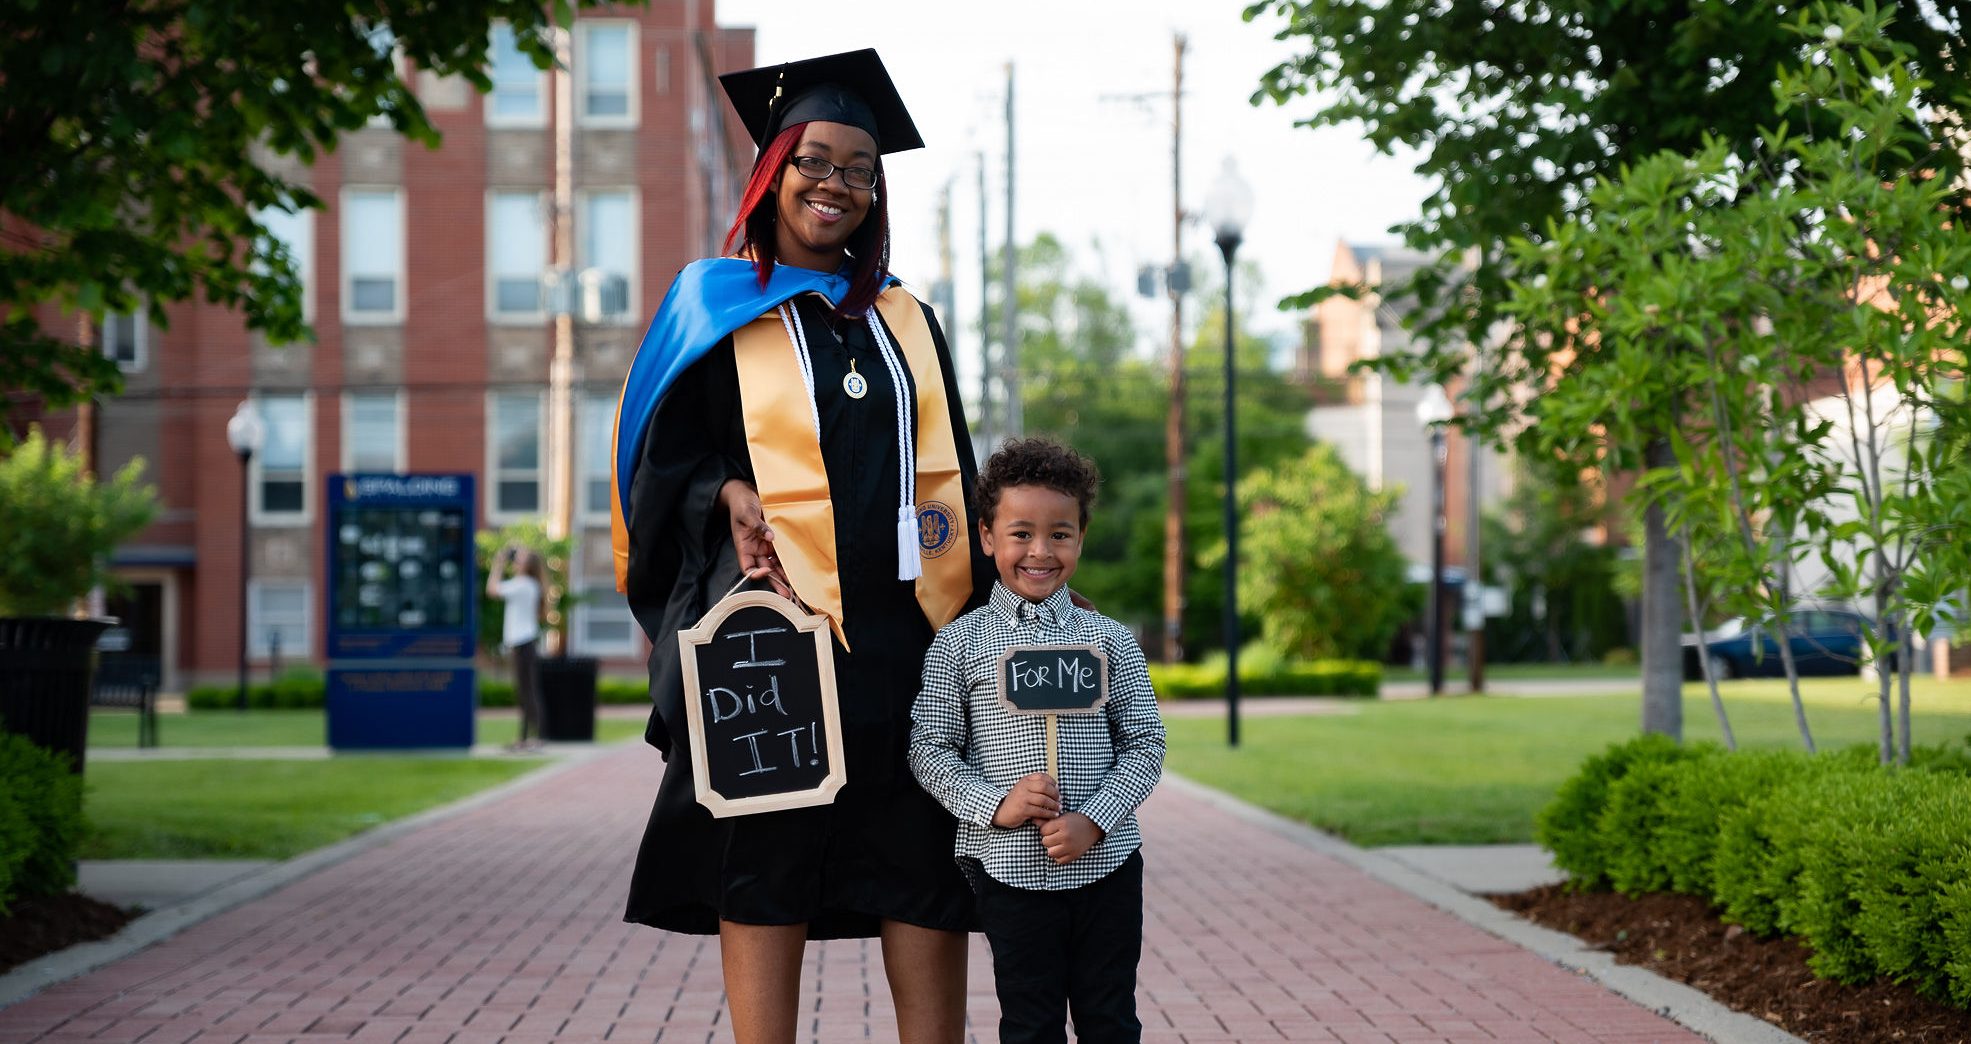 Spalding MSBC graduating student Kristin Spencer, wearing cap and gown, and her young son outside at Mother Catherine Square. Shes holding a sign, 